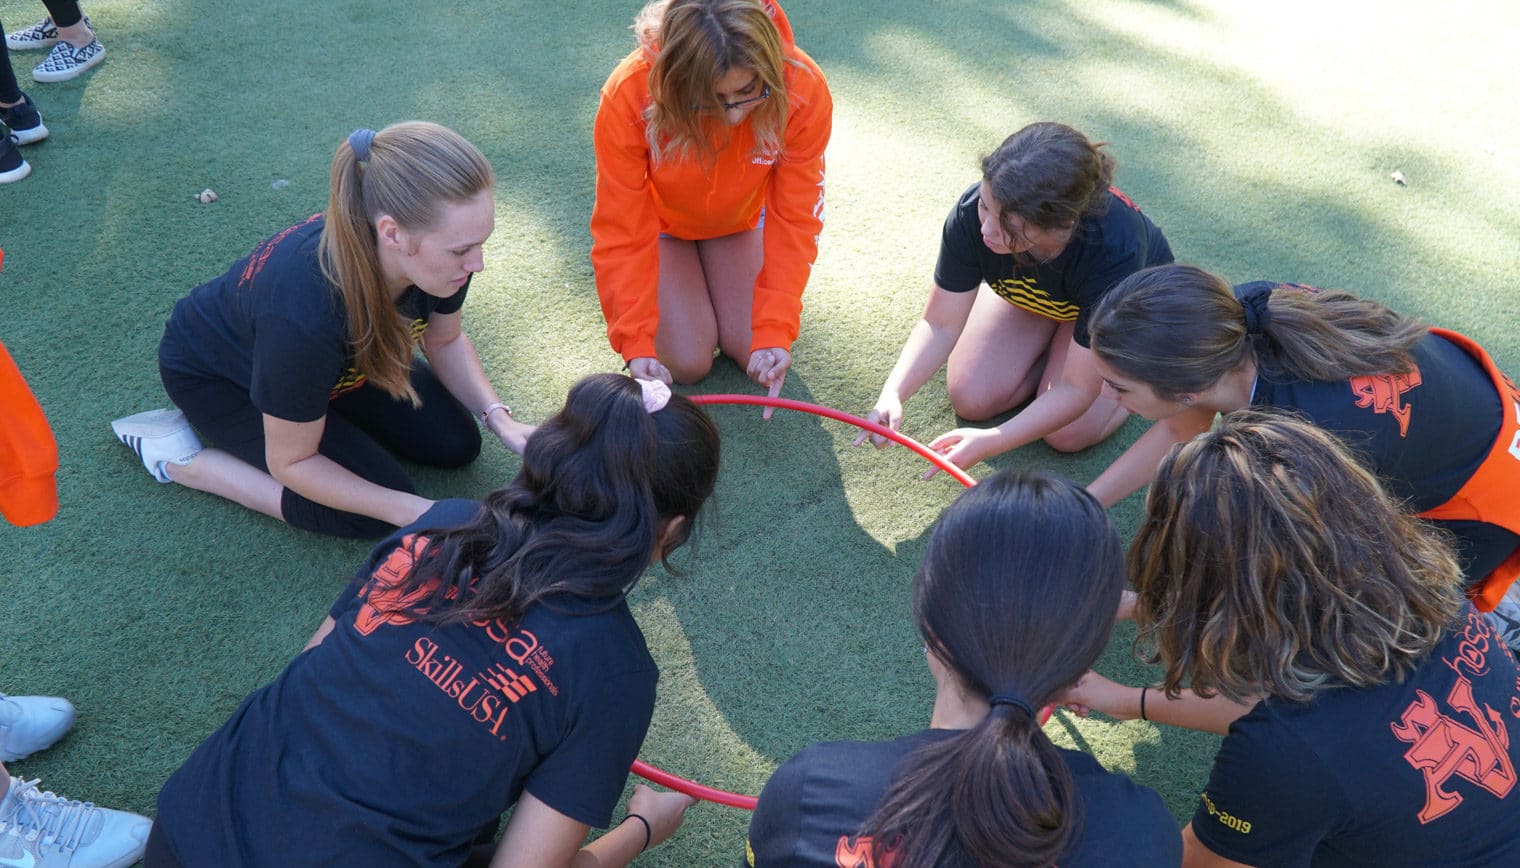 A group of people huddled together for a teambuilding activity.